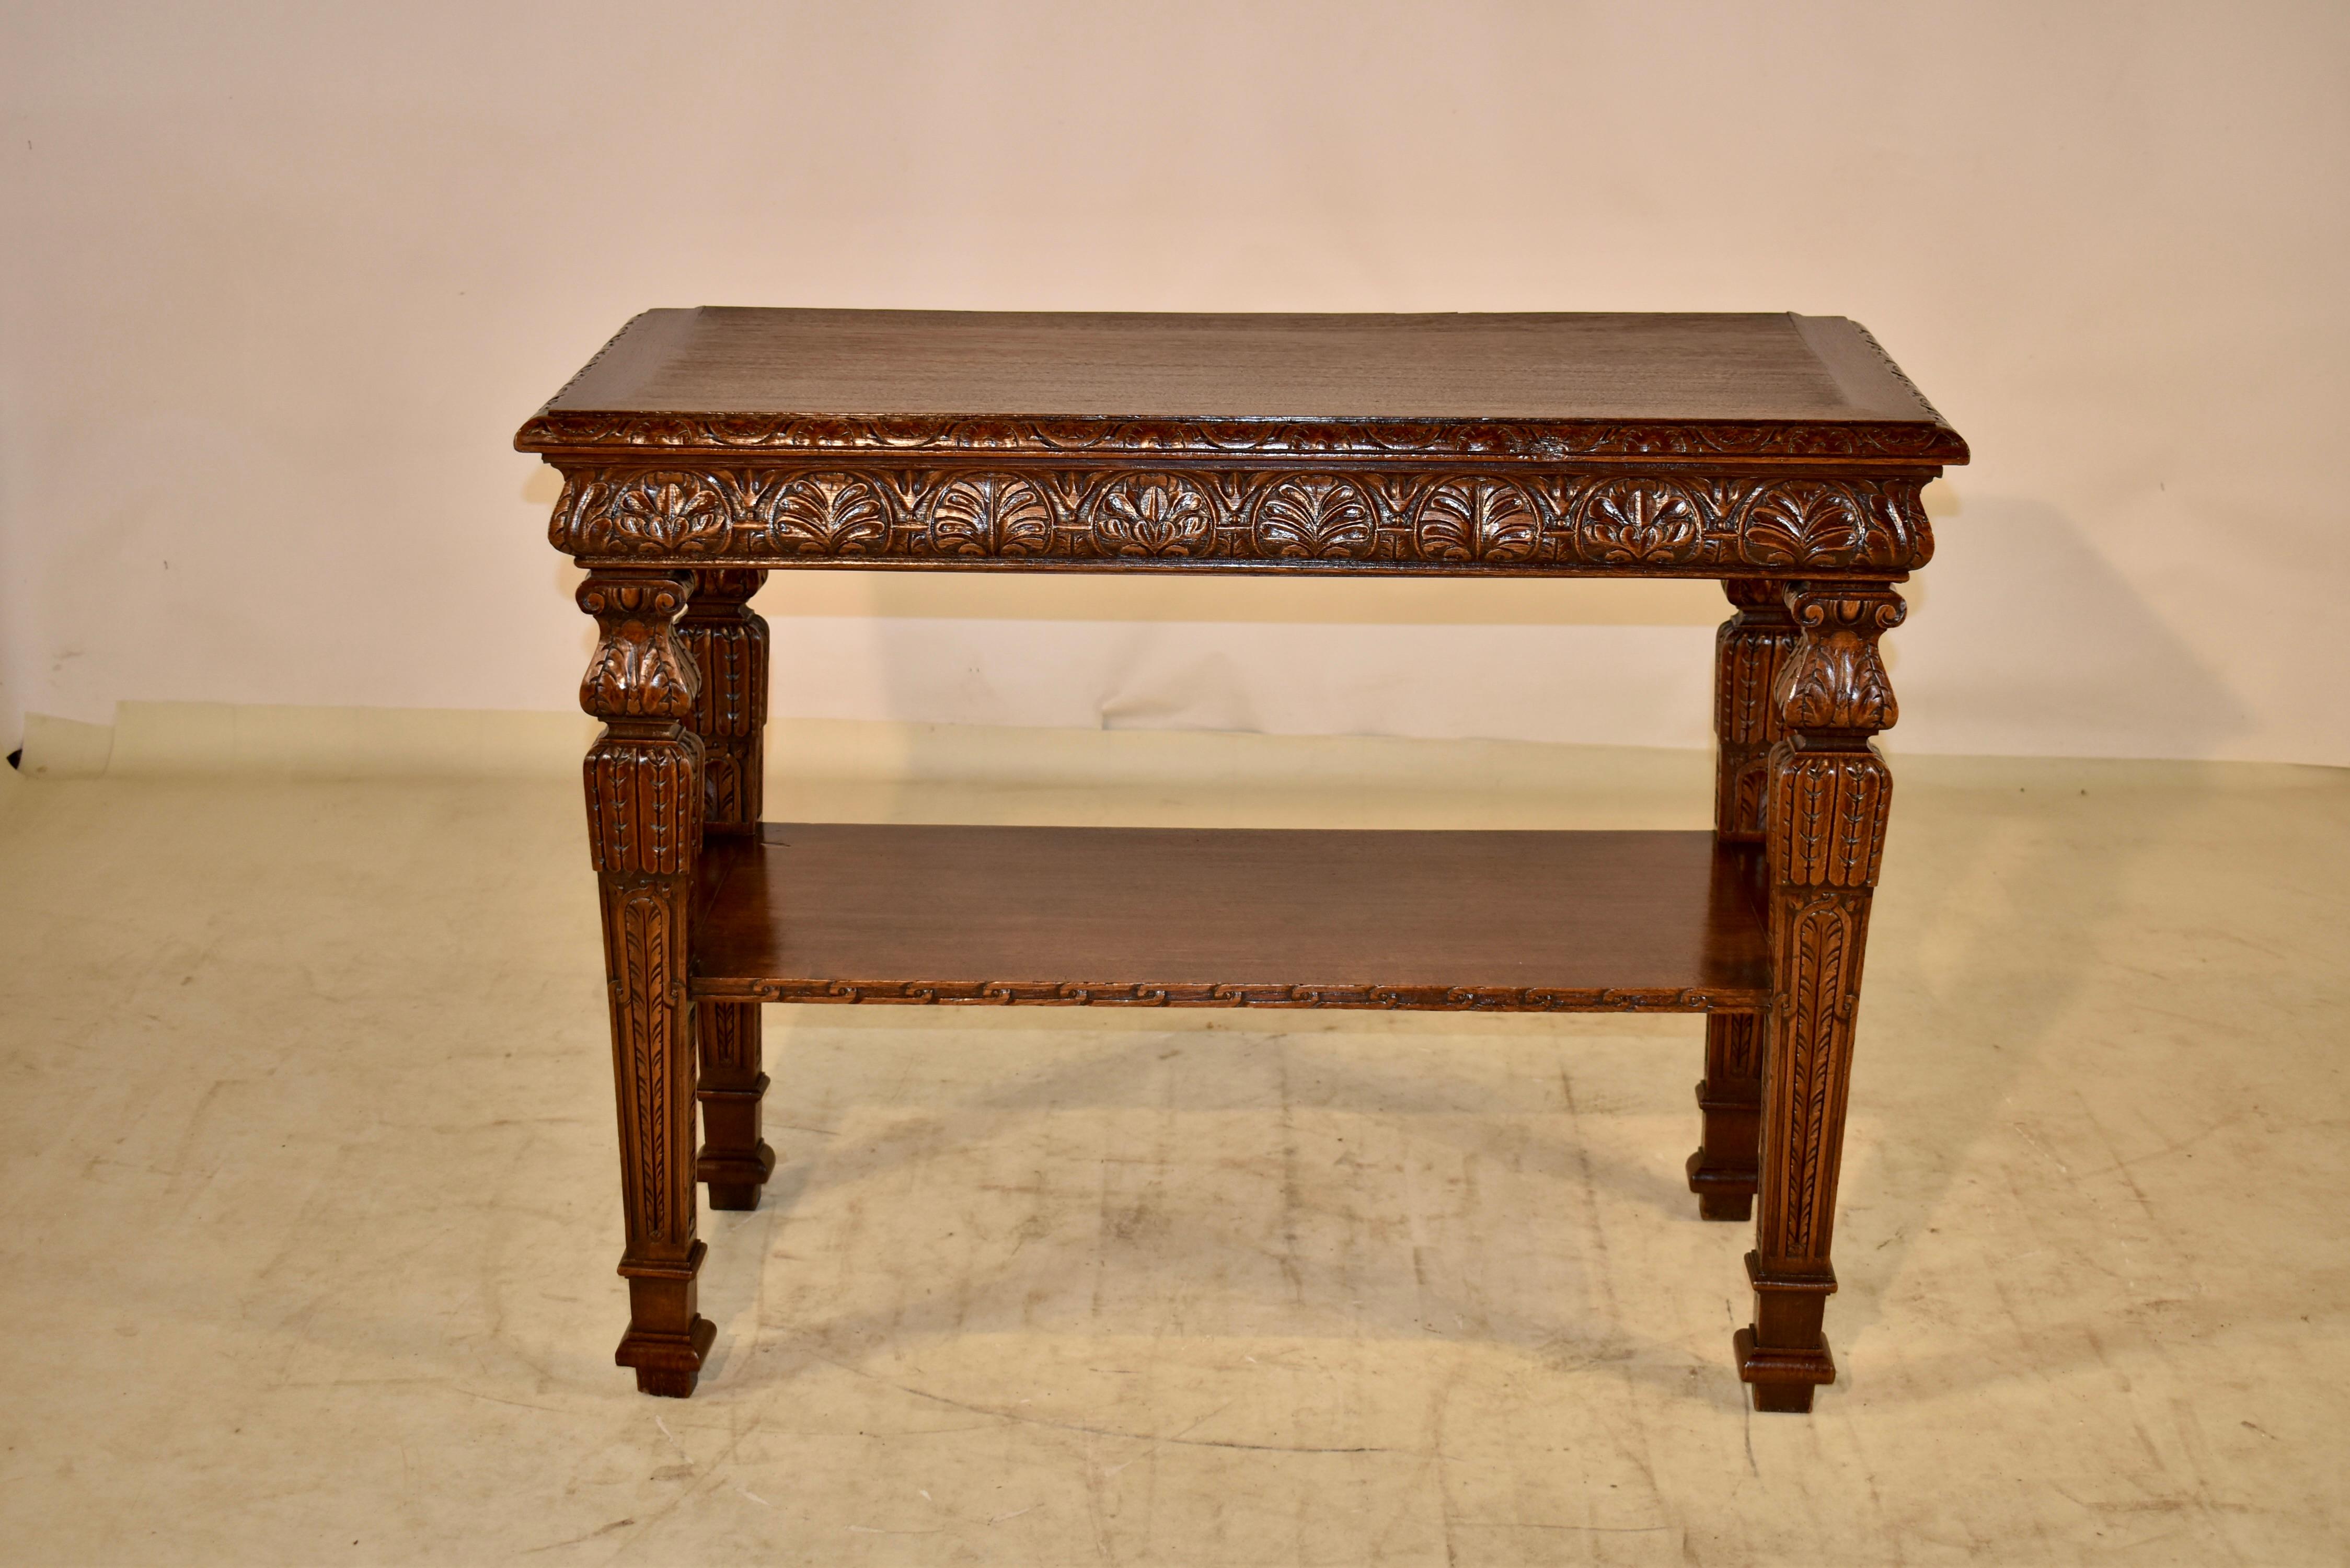 19th century oak console table from France with a beveled and hand carved decorated edge, following down to a lovely hand carved and molded shaped apron.  The table is supported on hand shaped and carved decorated legs, which are joined by a lower